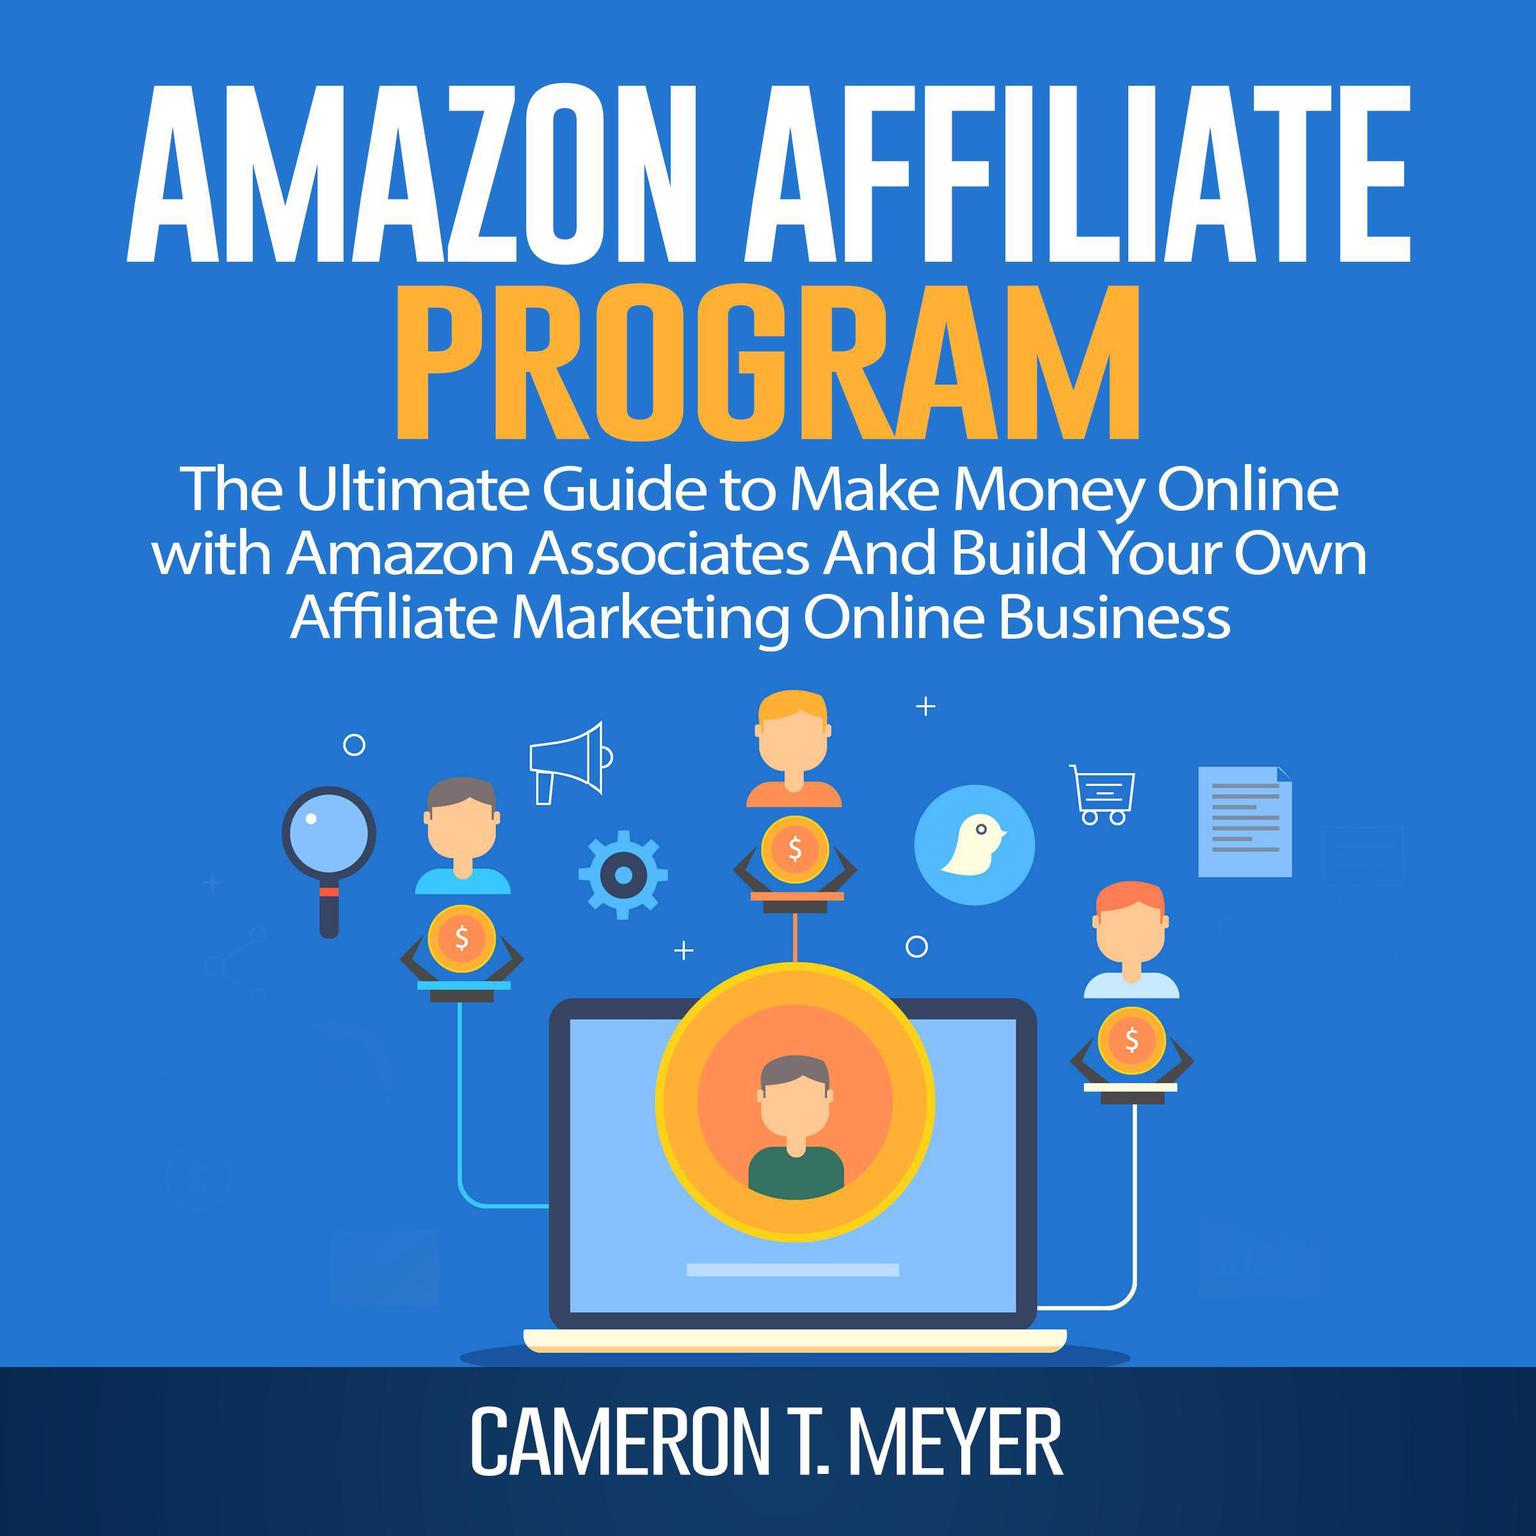 Amazon Affiliate Program: The Ultimate Guide to Make Money Online with Amazon Associates And Build Your Own Affiliate Marketing Online Business Audiobook, by Cameron T. Meyer